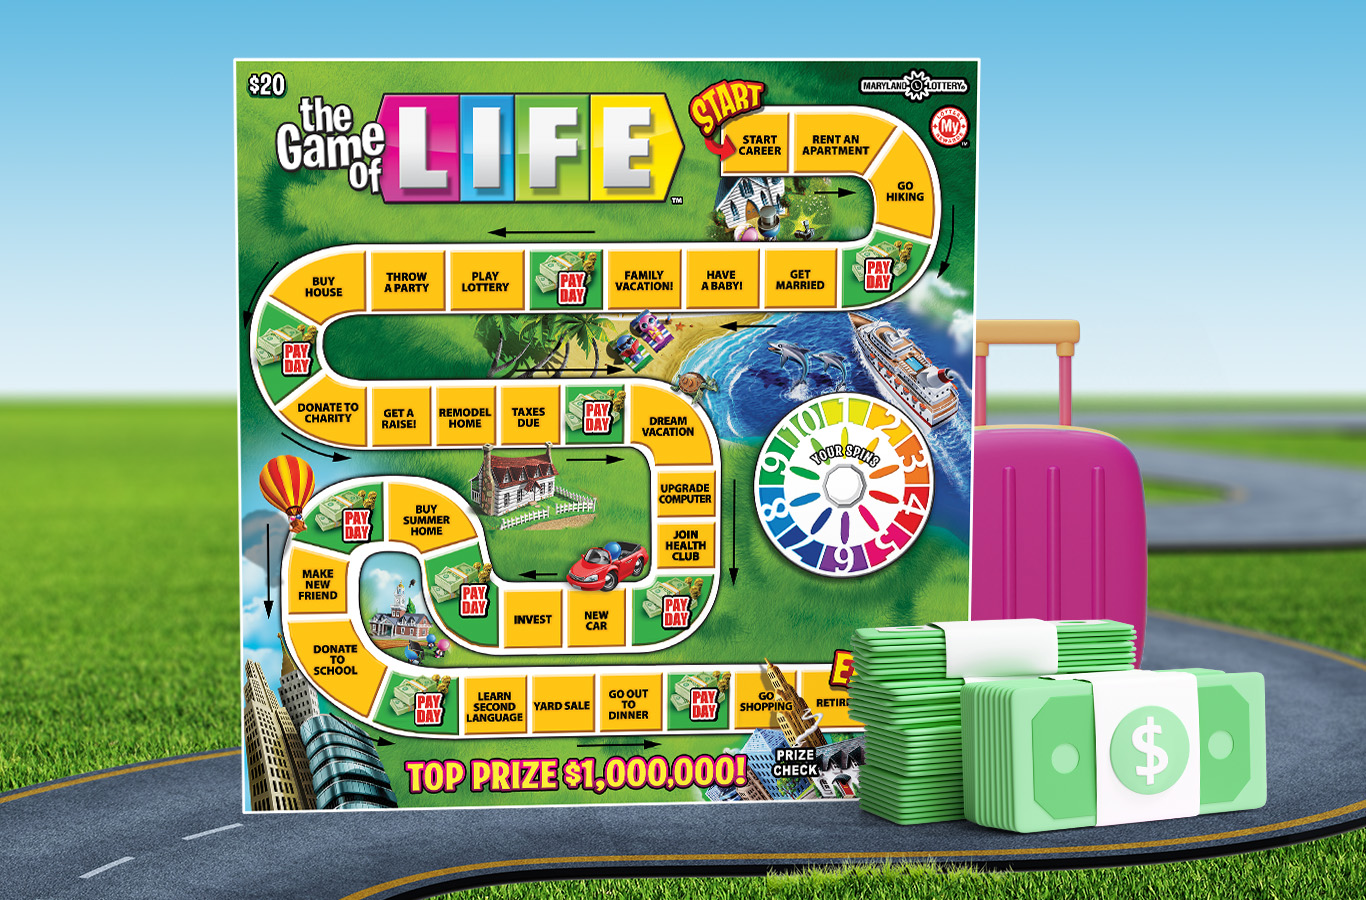 Play THE GAME OF LIFE™ Scratch-Off for your chance to win up to $1 million instantly or up to $25,000 in second-chance drawings!